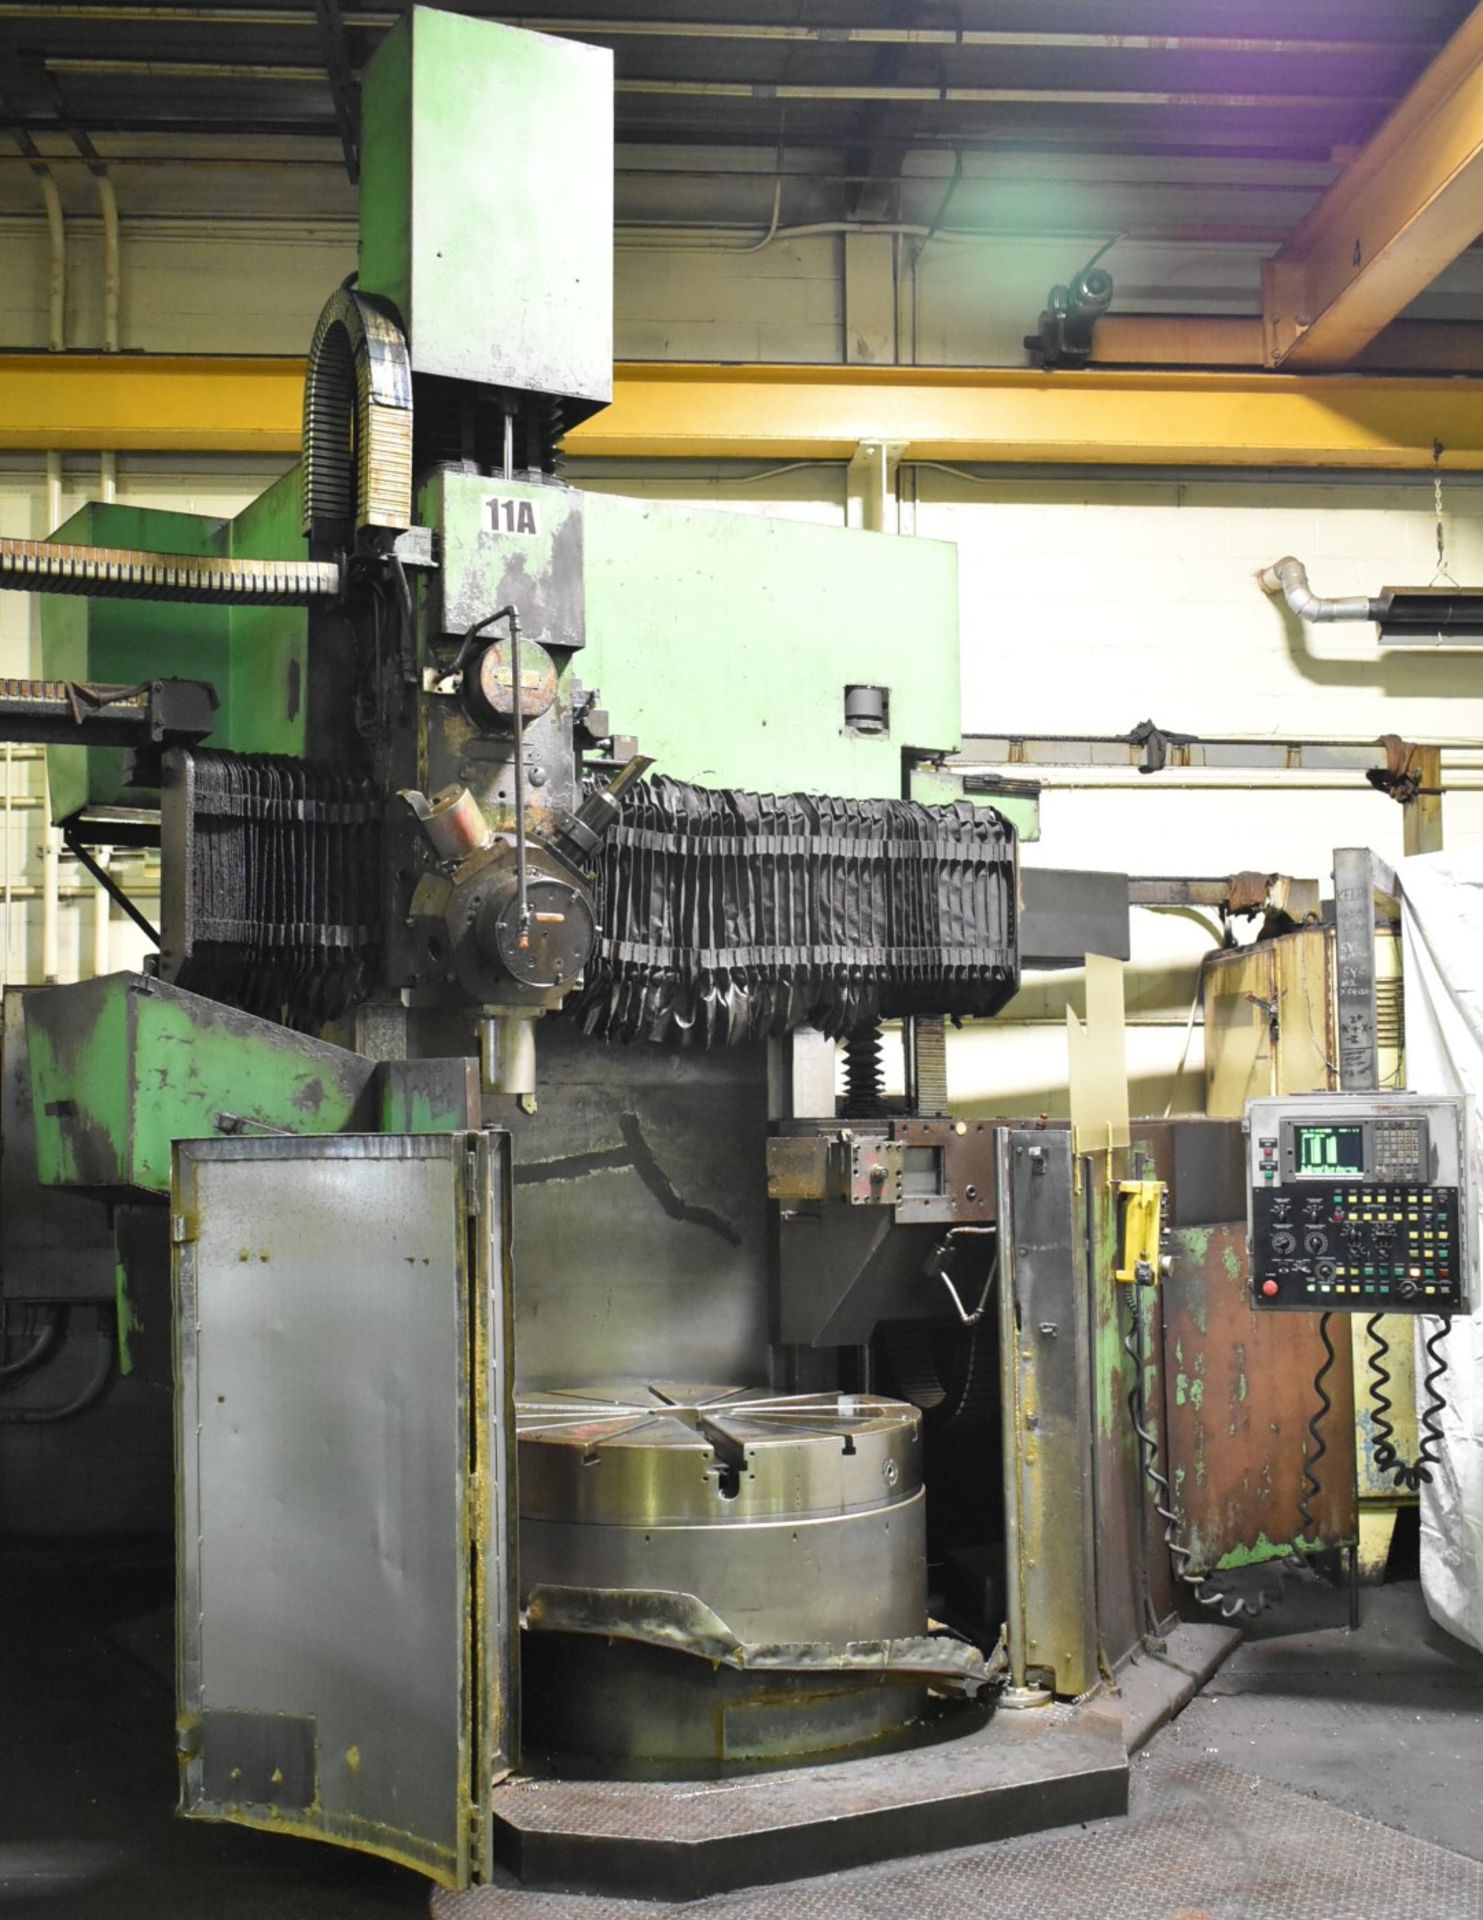 GIDDINGS & LEWIS 52" CNC VERTICAL TURRET LATHE WITH MITSUBISHI CNC CONTROL, 64" SWING, 42" MAX.